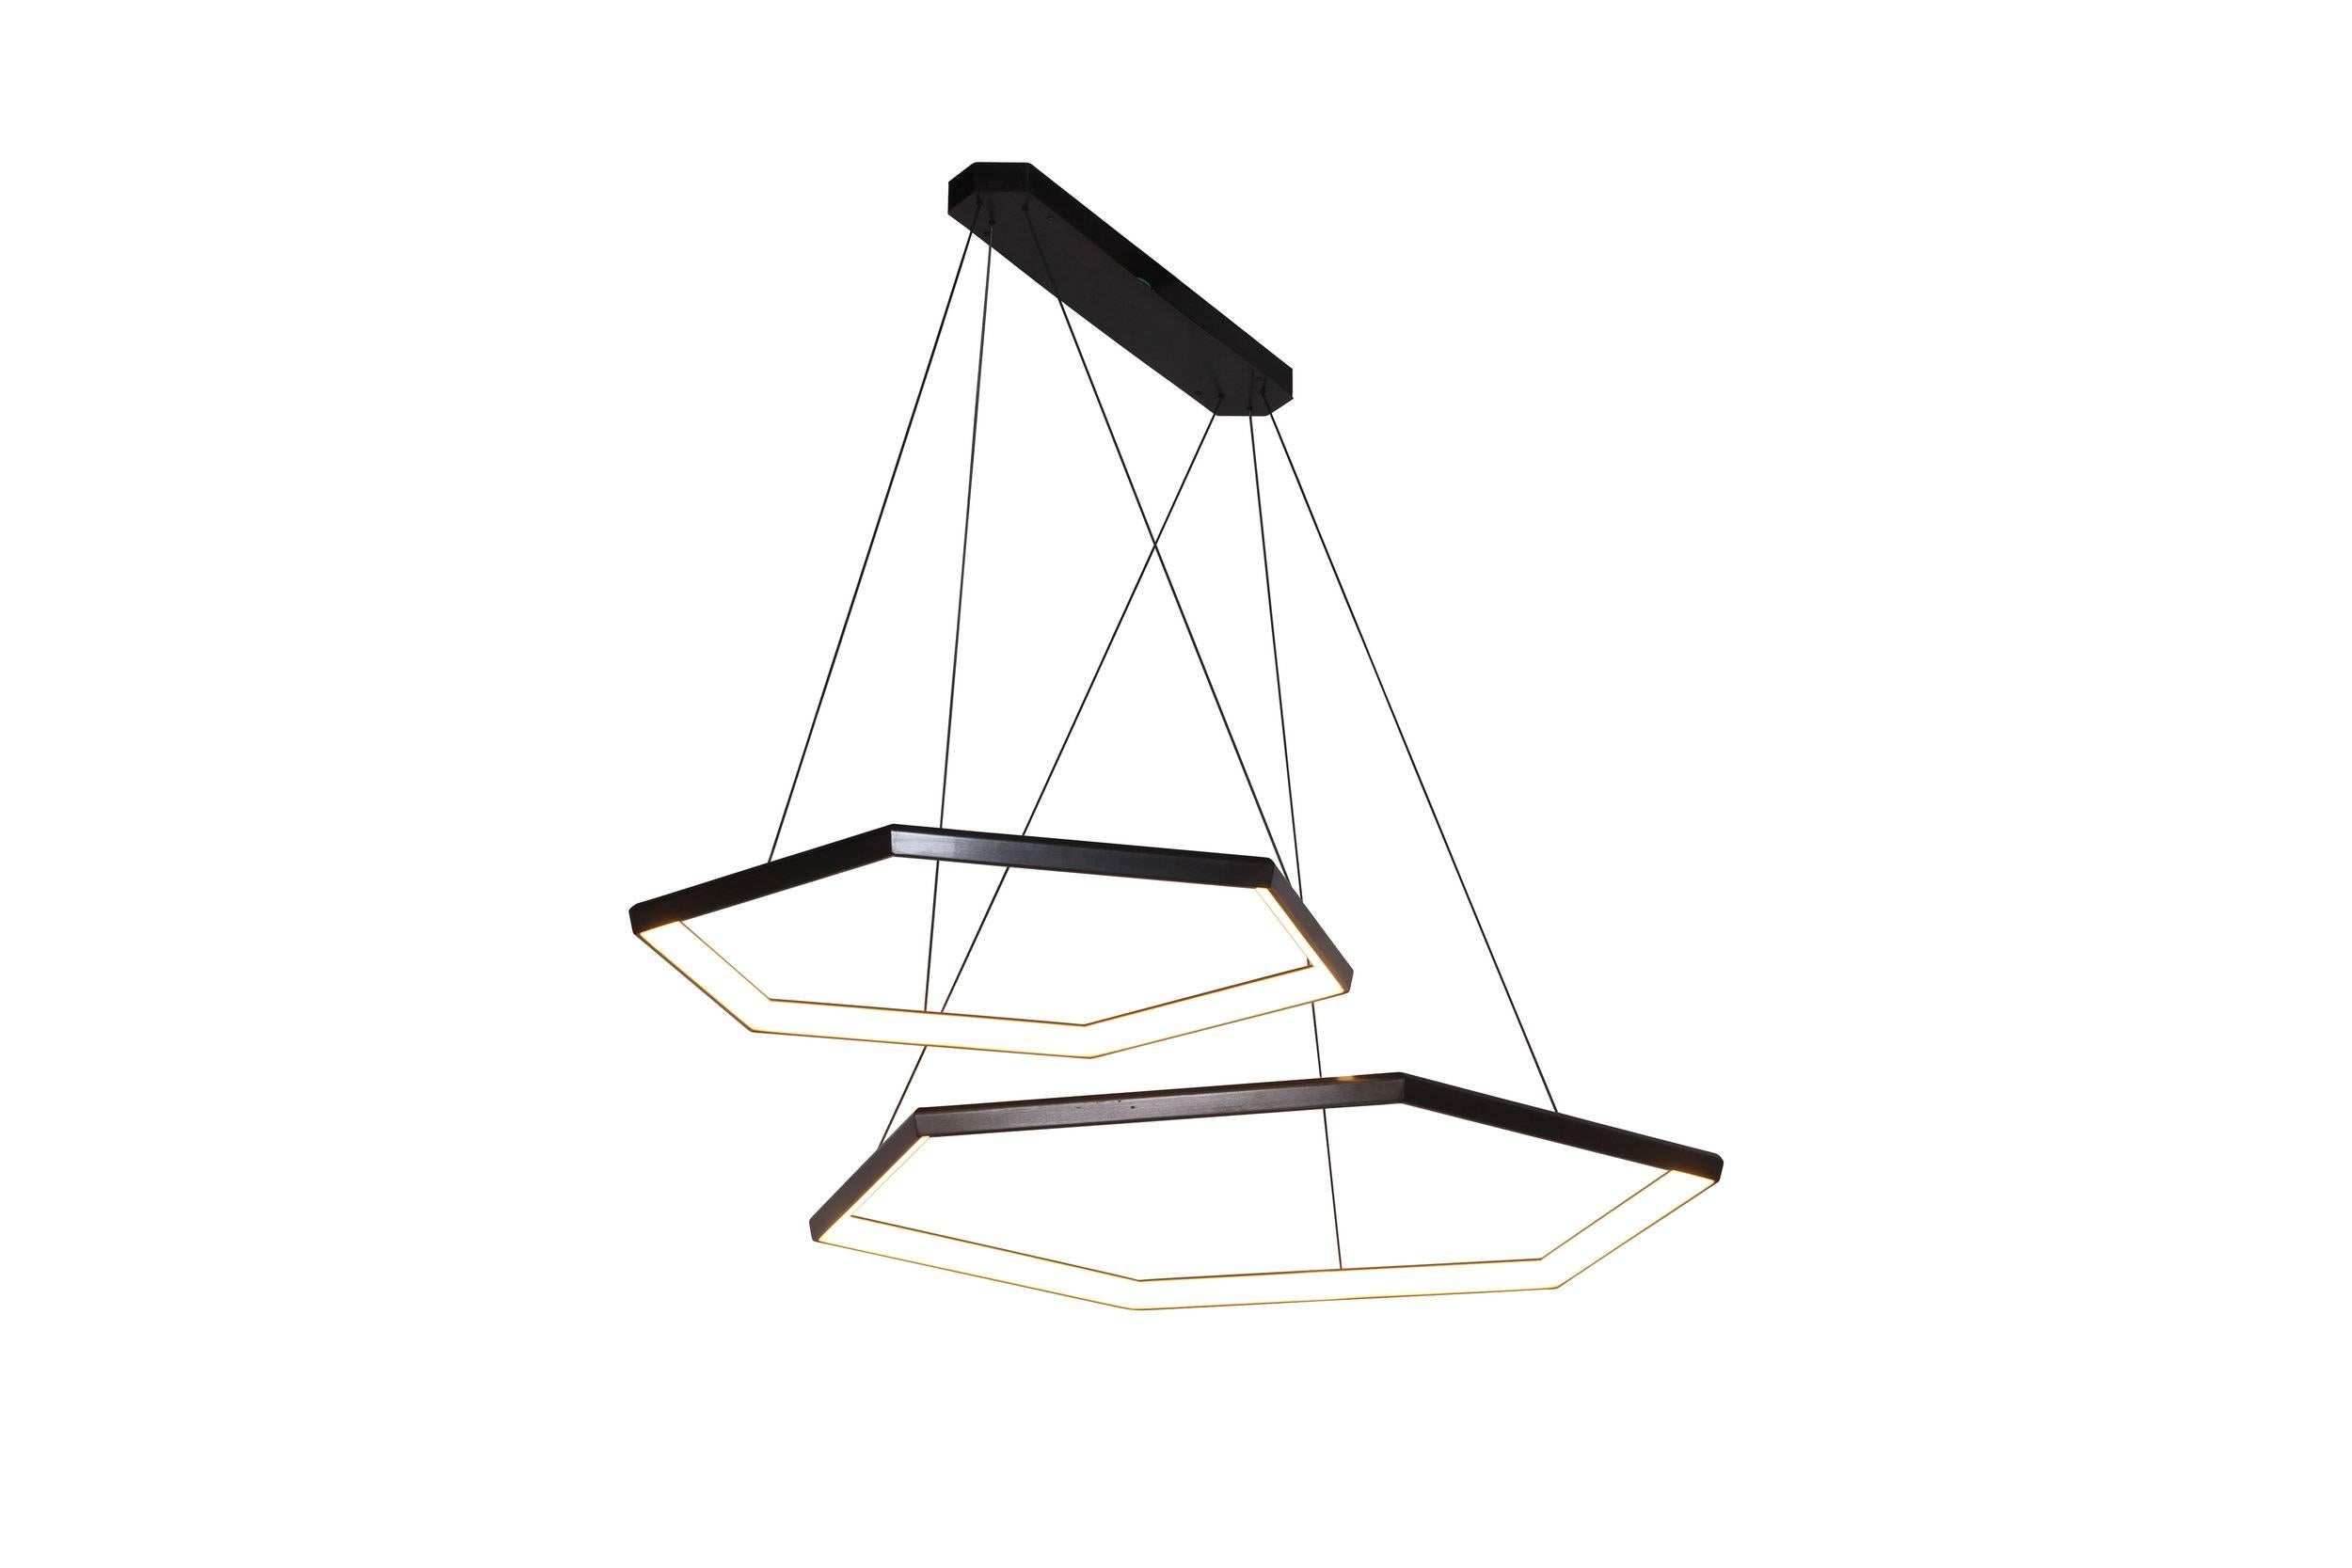 Hexia Duo HXD46 is a linear pairing of two of our HEXIA fixtures. Two rings are suspended from a linear canopy, in an asymmetric arrangement. This fixture can be customized to utilize different sizes. Multiple fixtures can be added to create a